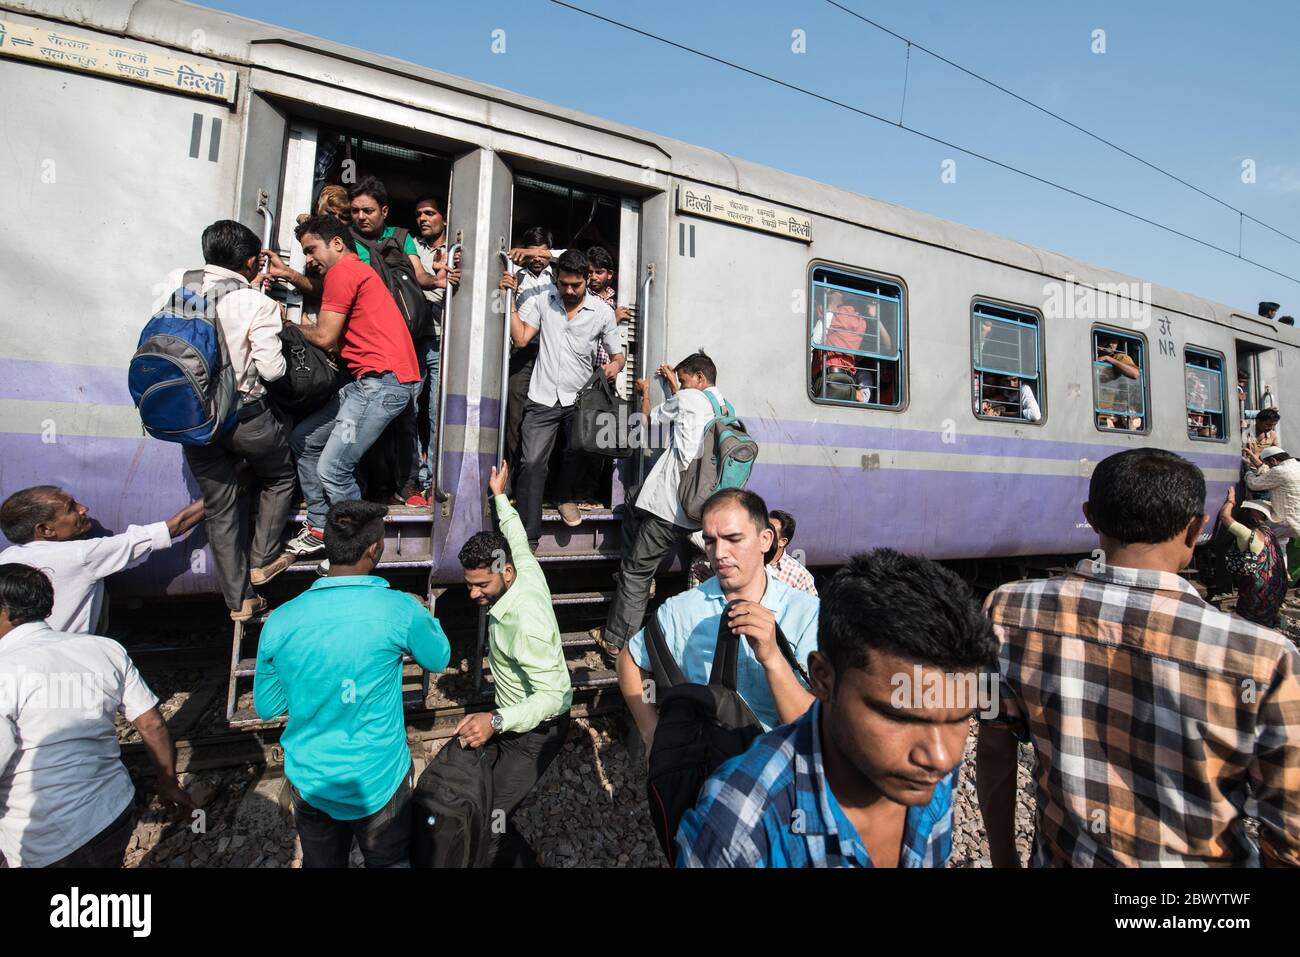 Commuters hang out of an overcrowded Indian Railways train, at Noli Railway Station near Ghaziabad, New Delhi, India. Stock Photo